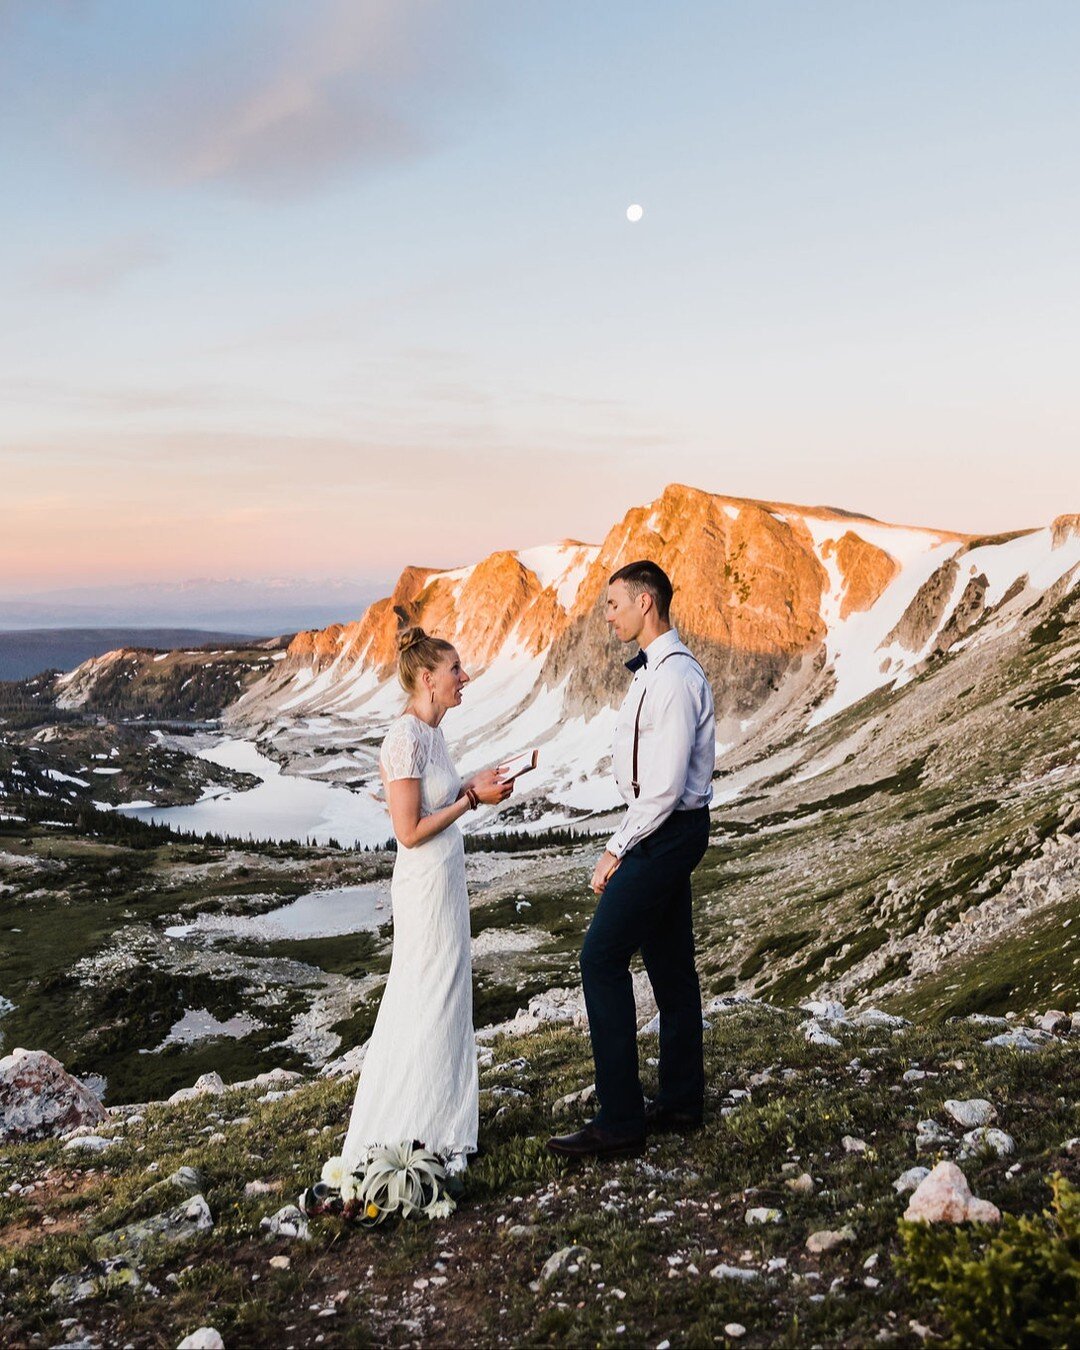 💍⛰️Private Vow Exchanges

Are you eloping with guests but also want the experience of exchanging your vows just the two of you in the wilderness? You can have both! Many of our couples are choosing to have a &quot;formal&quot; ceremony with their gu